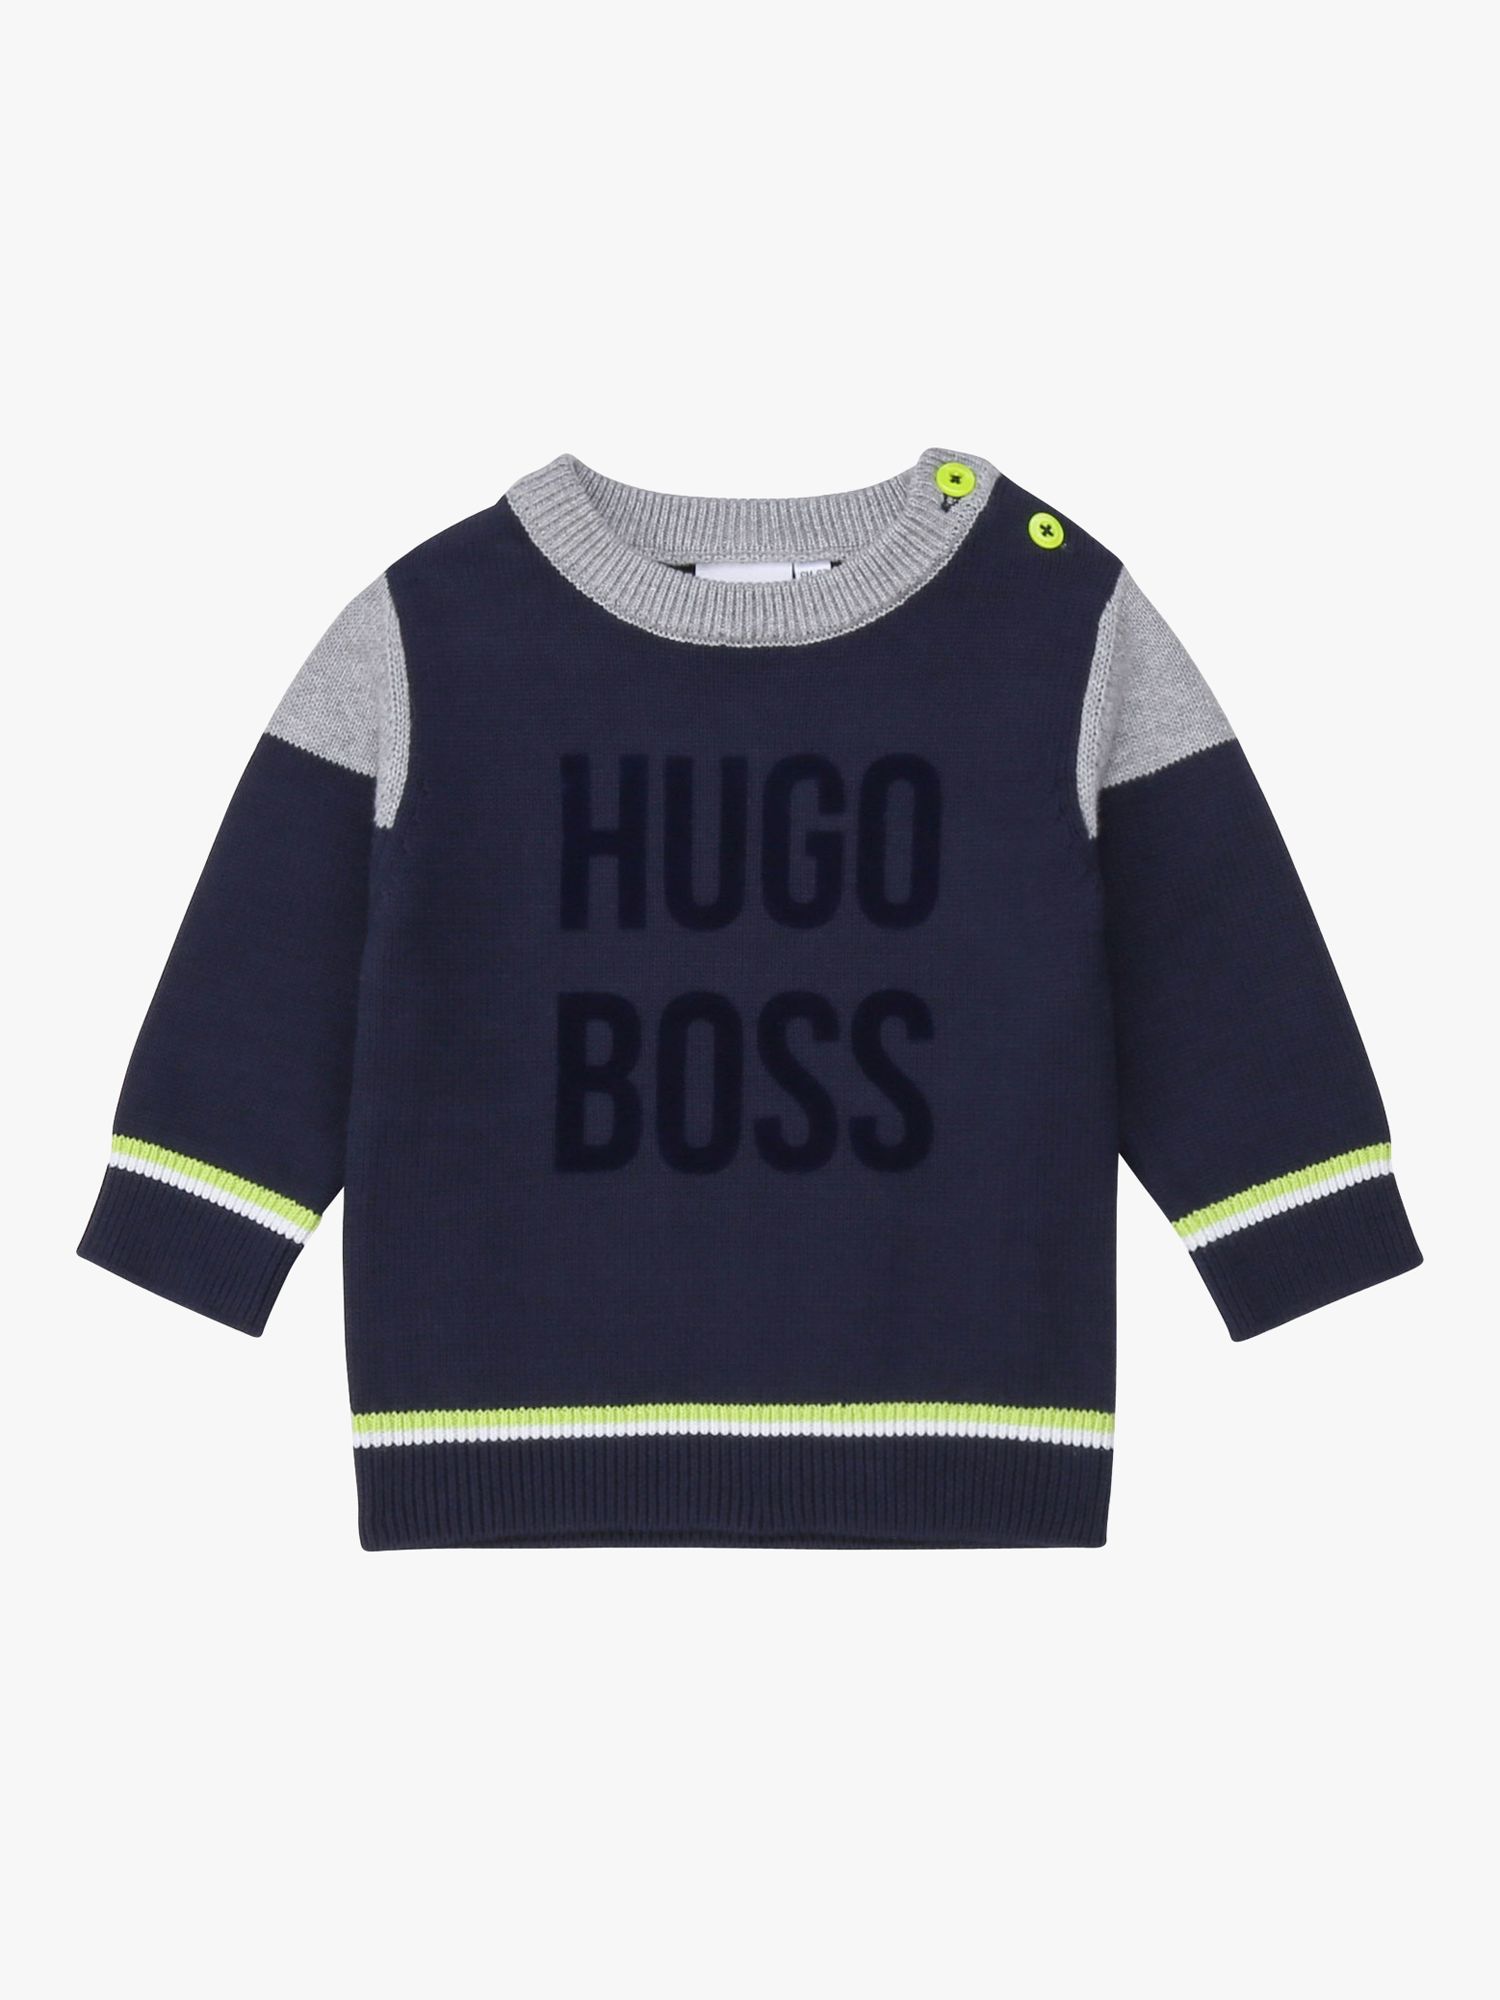 HUGO BOSS Baby Combed Cotton Knit 